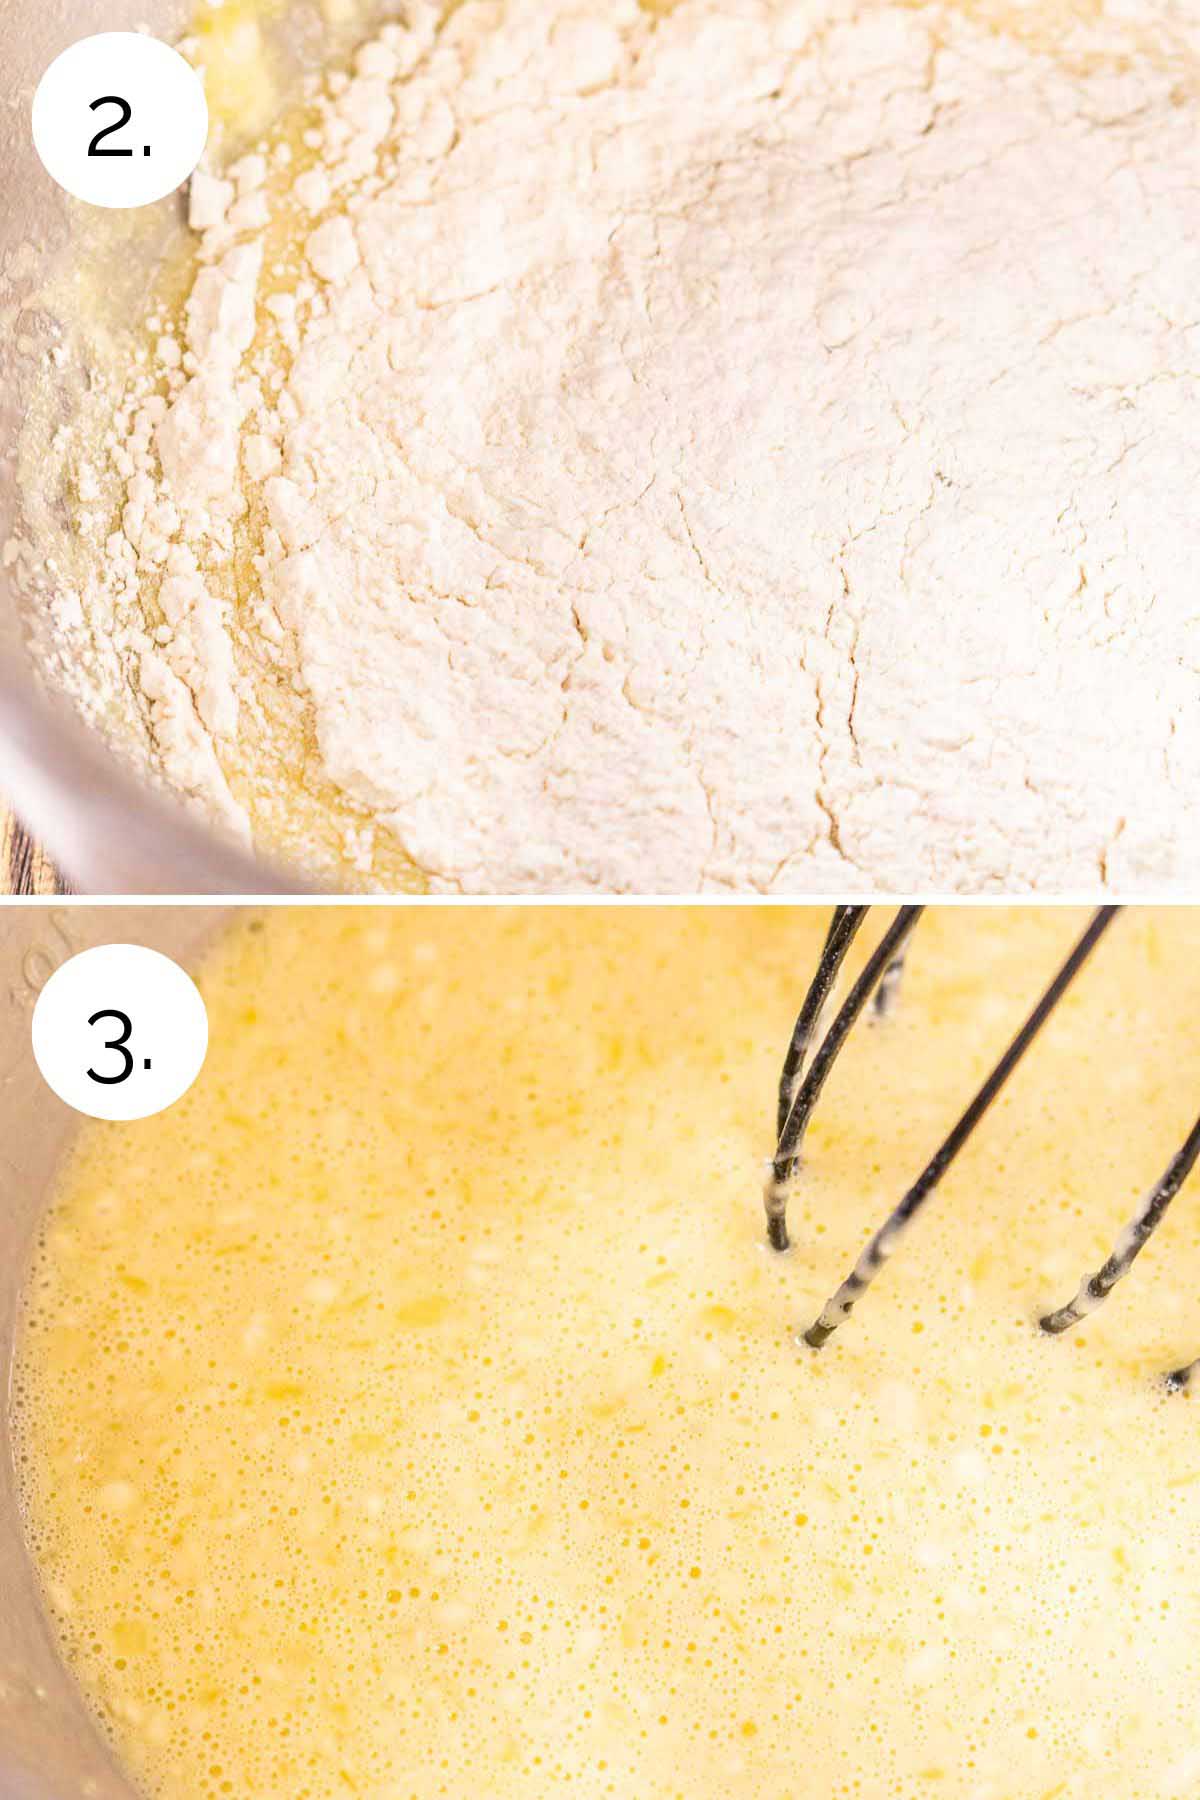 A collage showing the process of adding the flour and whisking to make the batter.